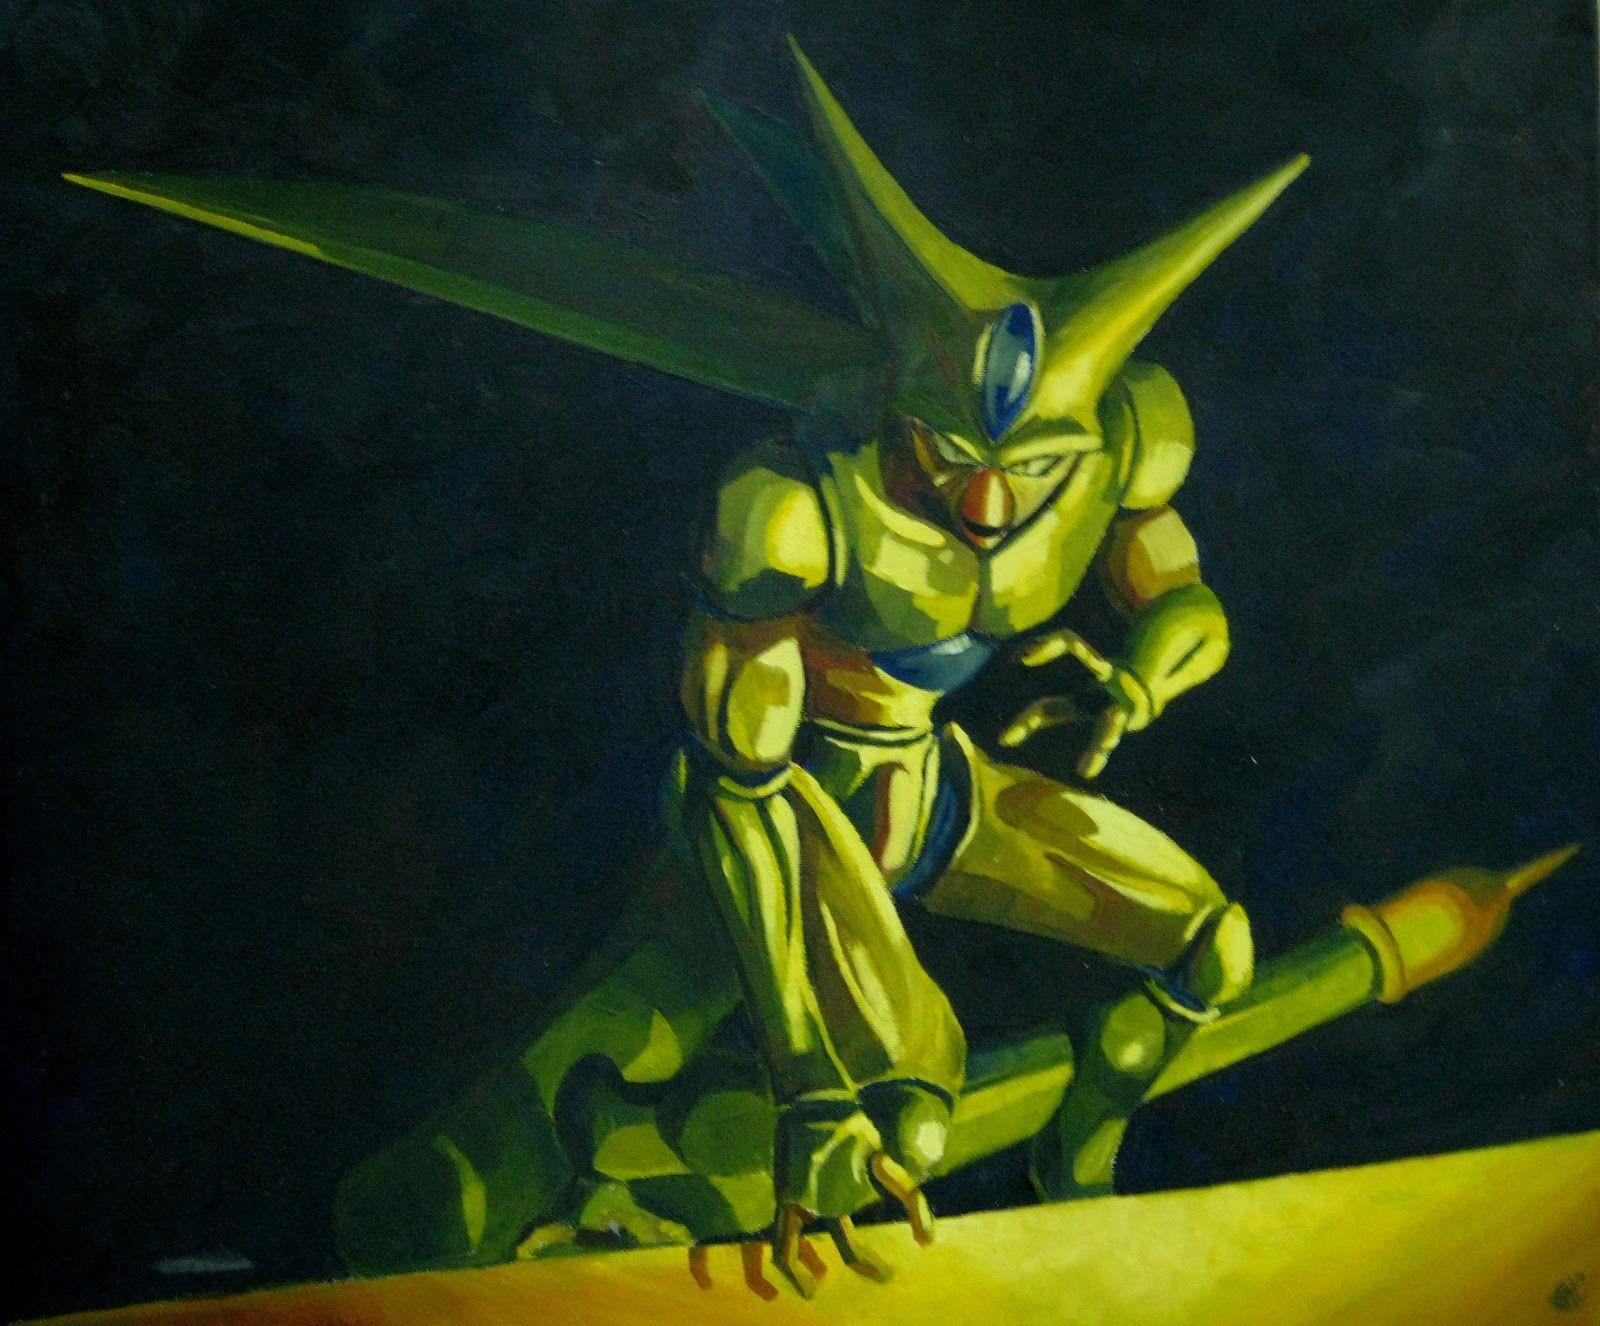 DRAGON BALL Z WALLPAPERS: Imperfect cell